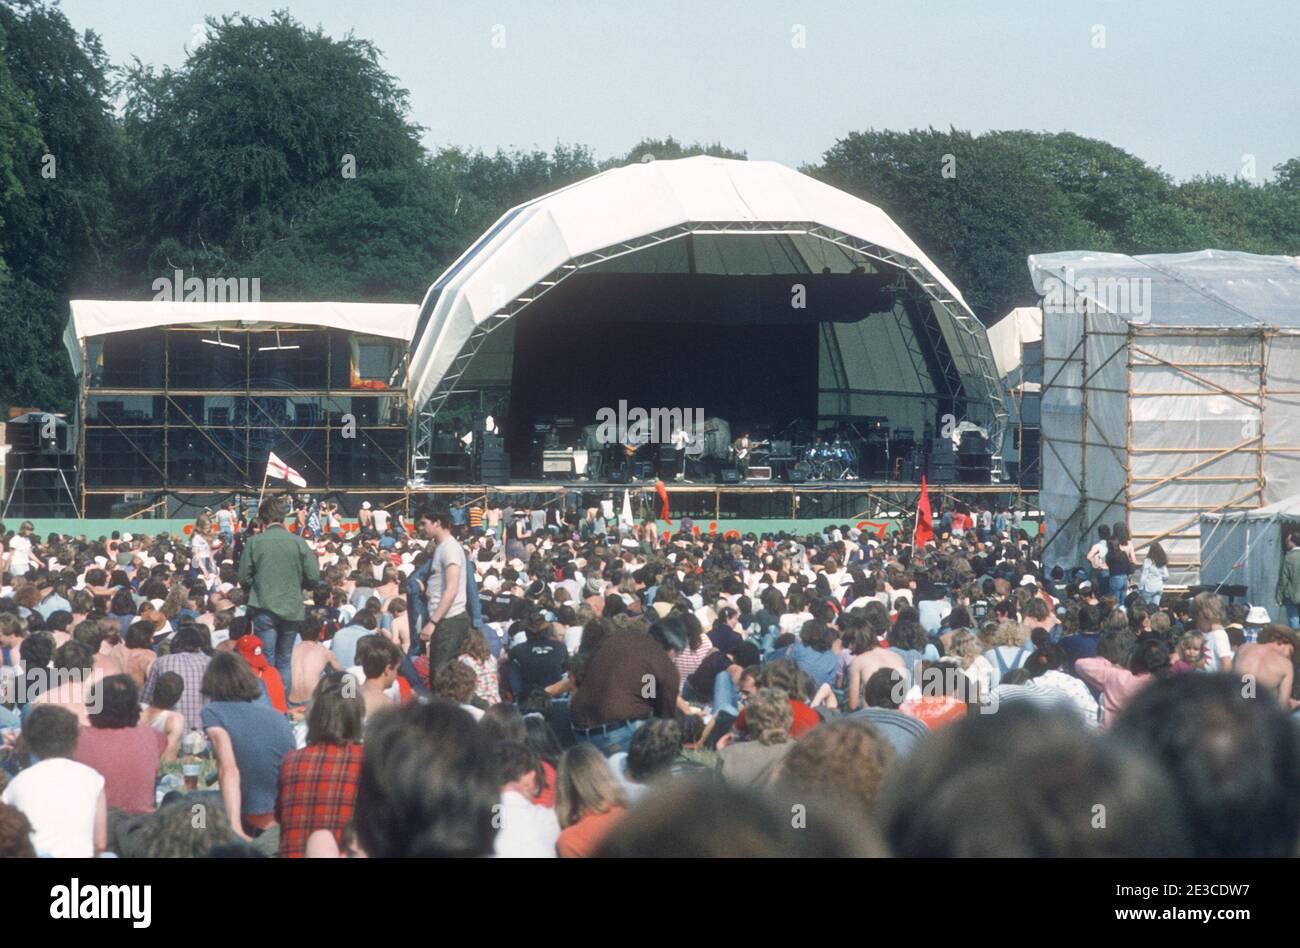 1982 Theakstons Nostell Priory Festival Yorkshire August 28th1982 First act on stage Marillion on stage opening act of the festival at Nostell Priory Wakefield West Yorkshire England UK GB Europe Stock Photo